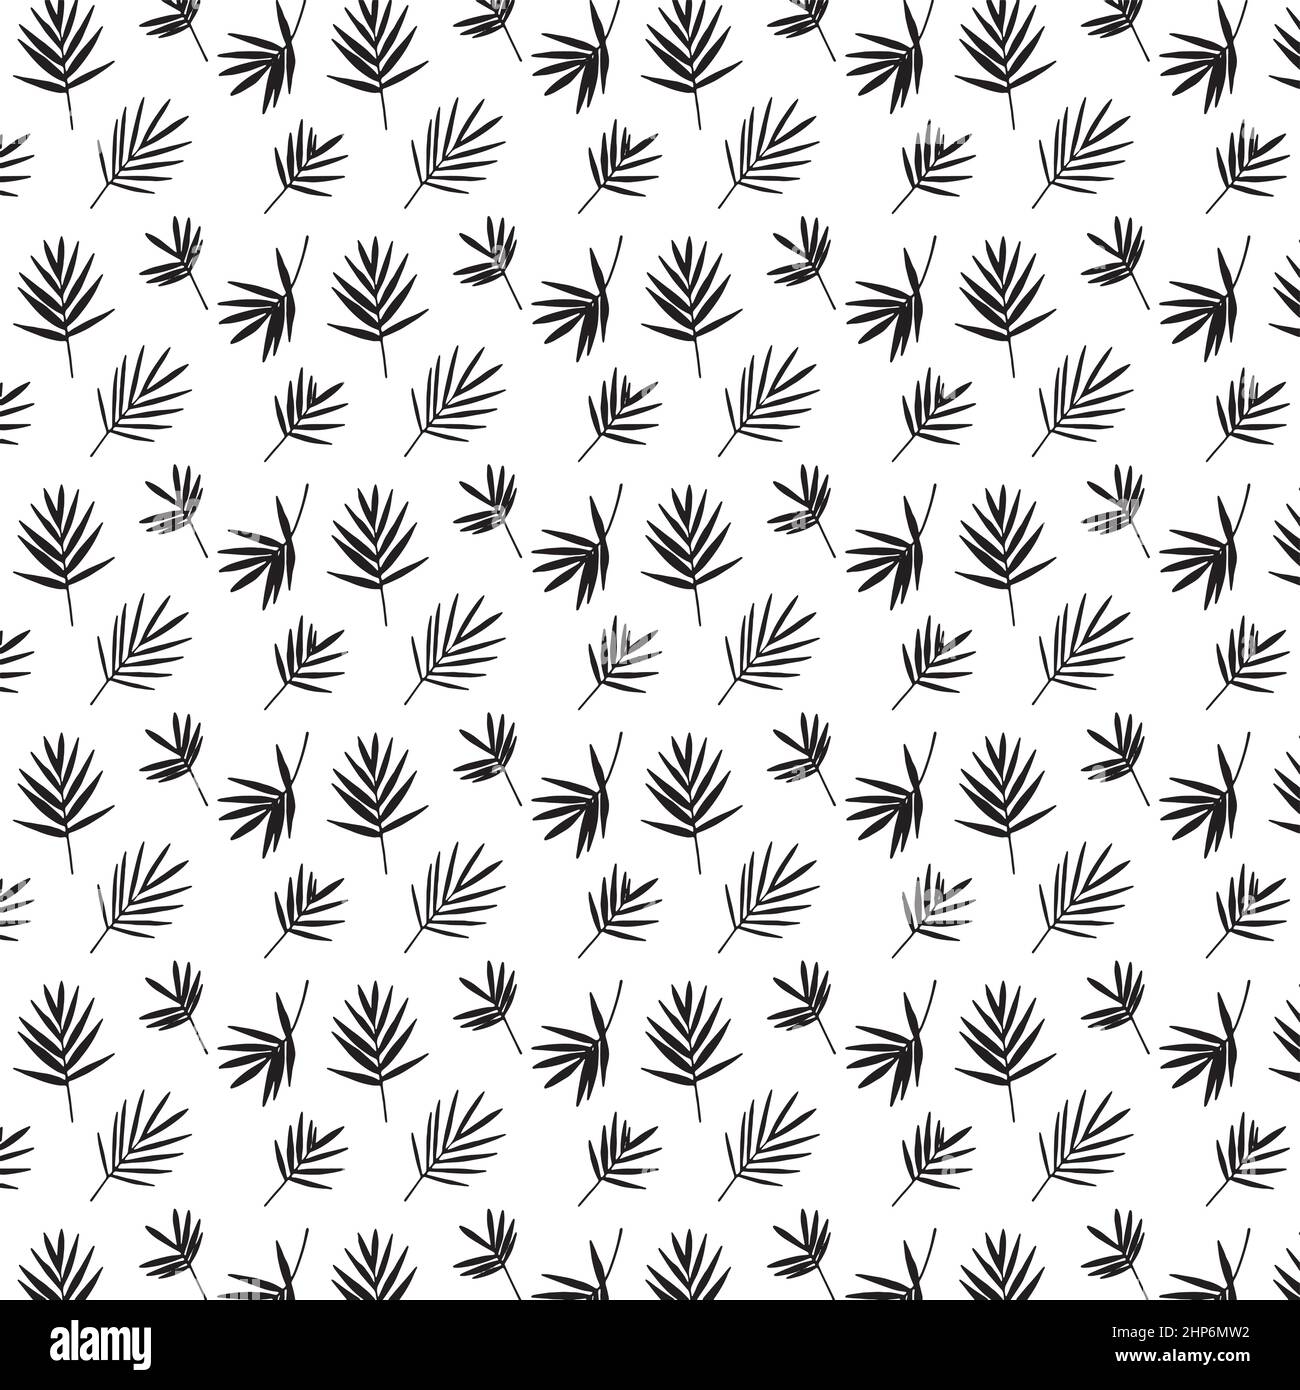 Black and white tropical palm leaves seamless pattern. Vector illustration. Stock Vector